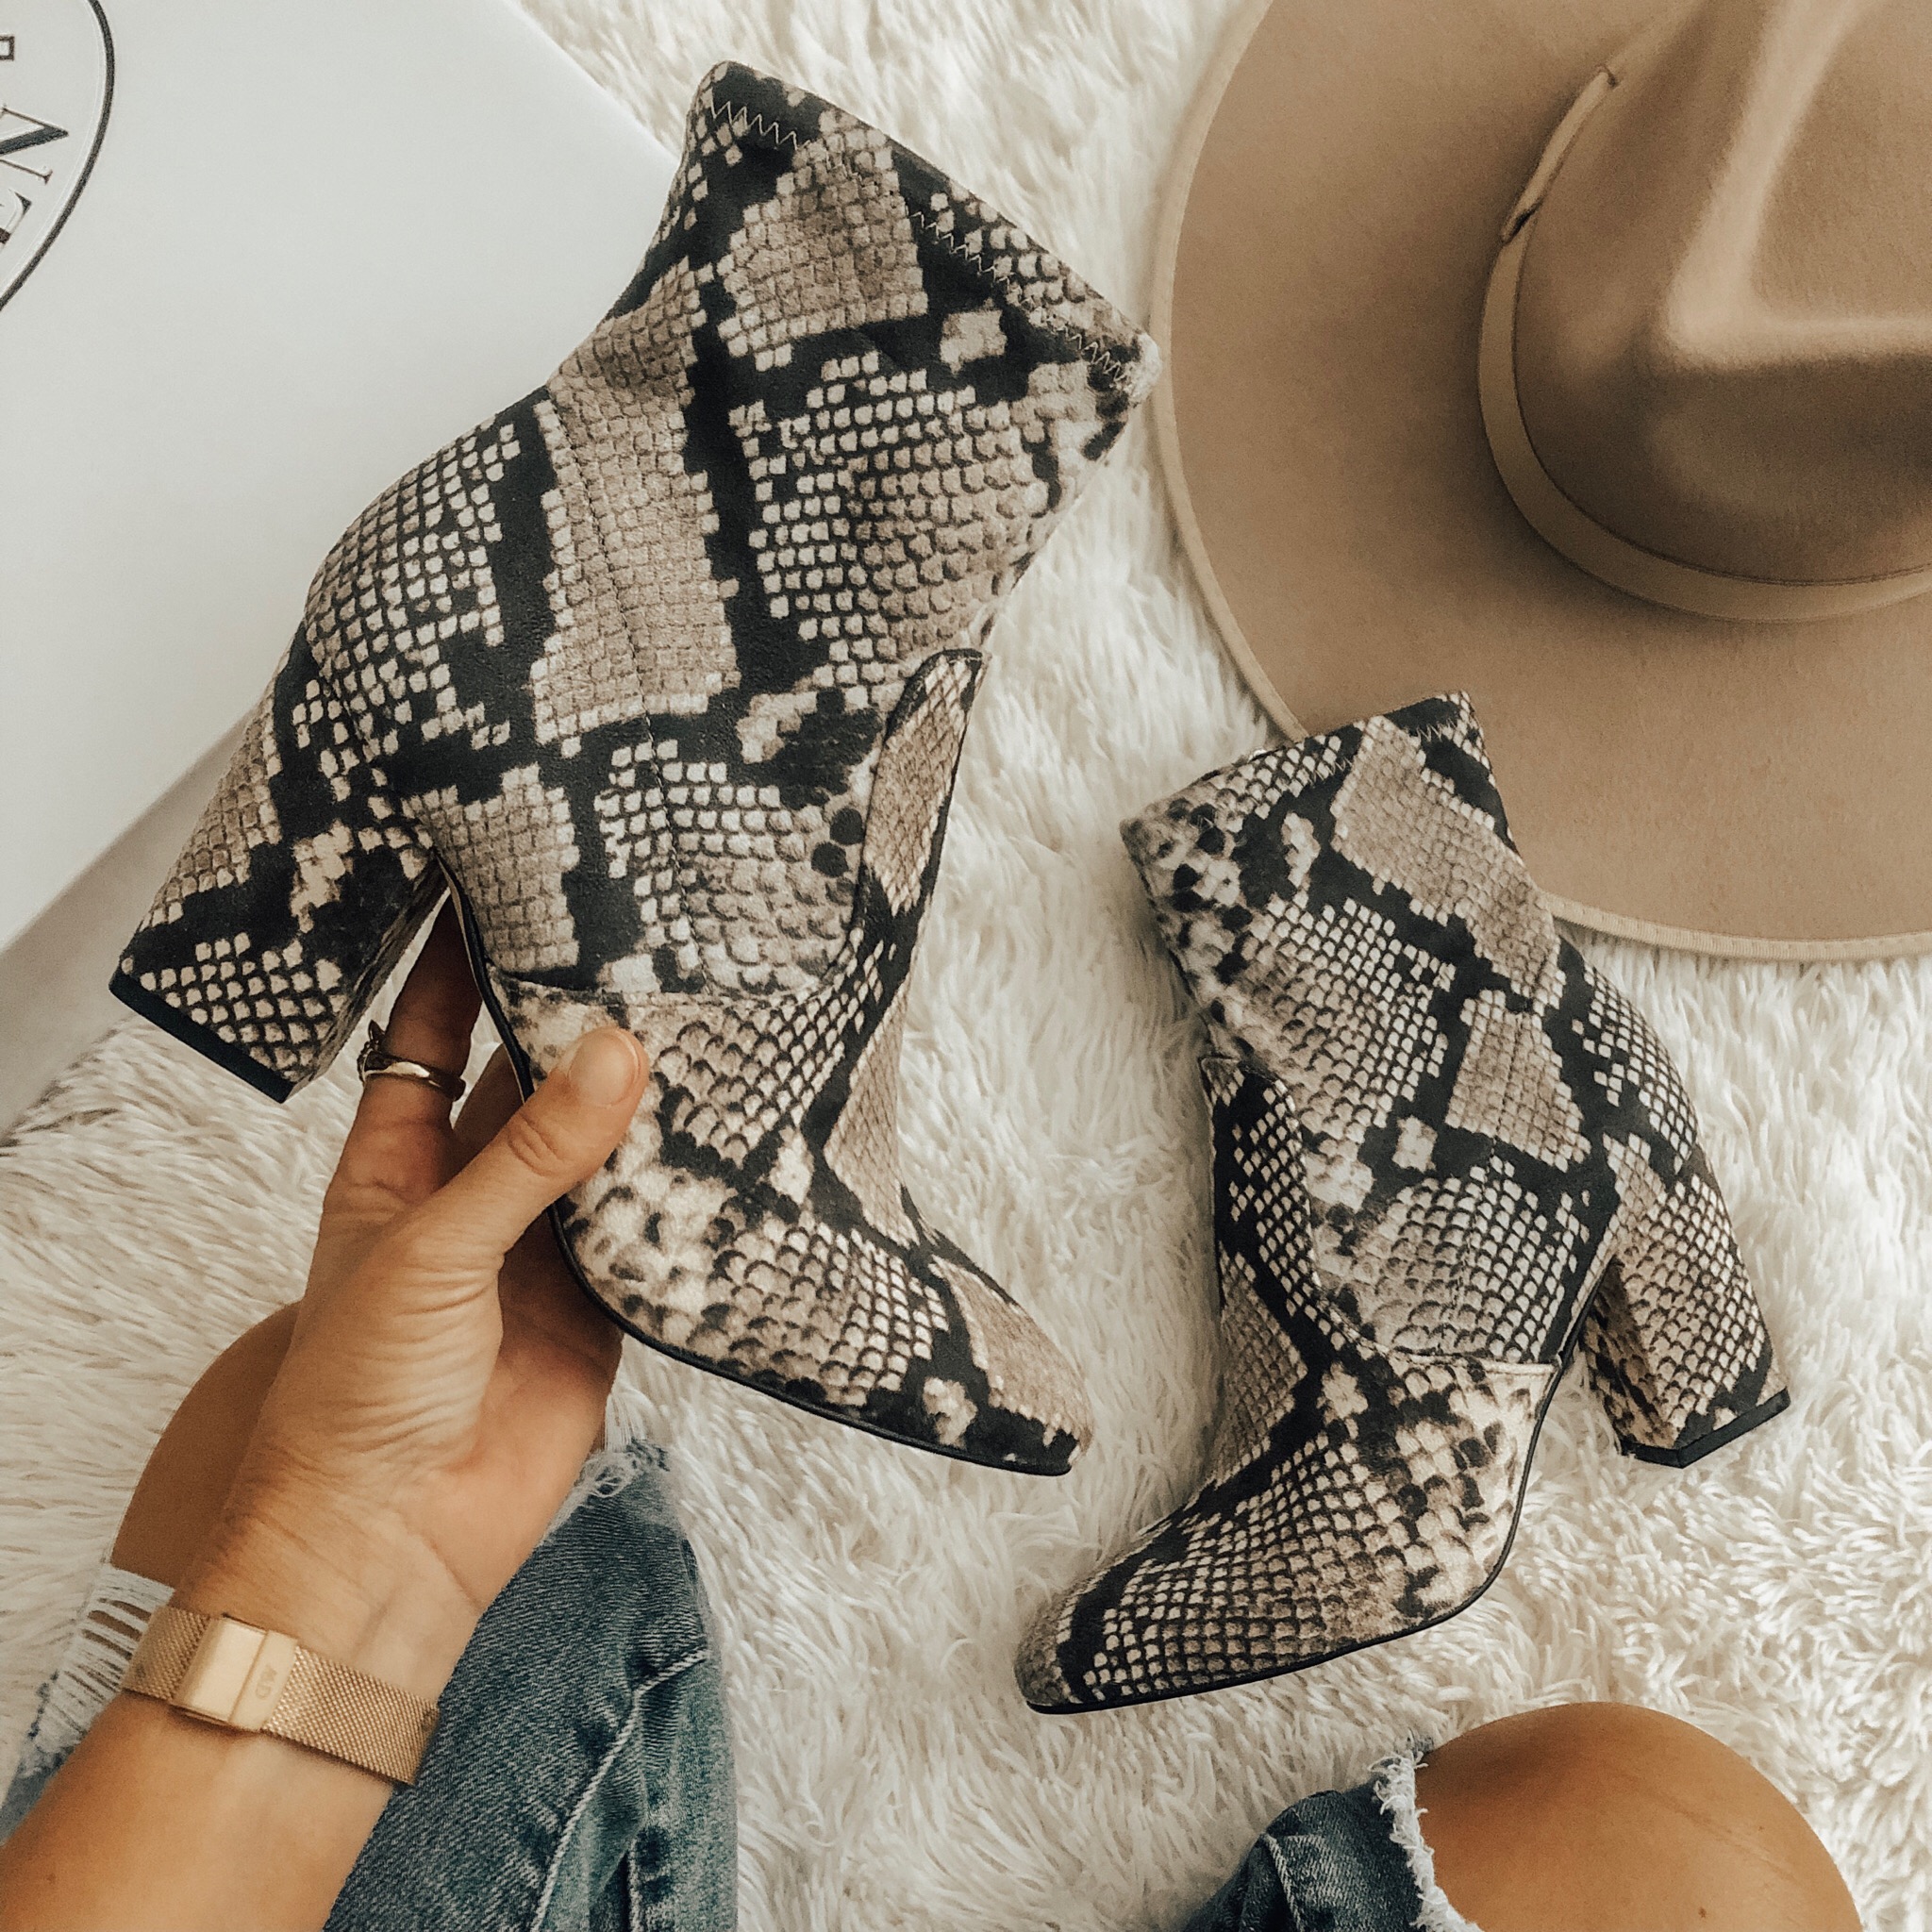 AUGUST TOP 10- Jaclyn De Leon Style + Sharing all of last months top selling items from my favorite travel jewelry case, a cute walmart ruffle top, leopard tank, the best snakeskin booties and so much more!